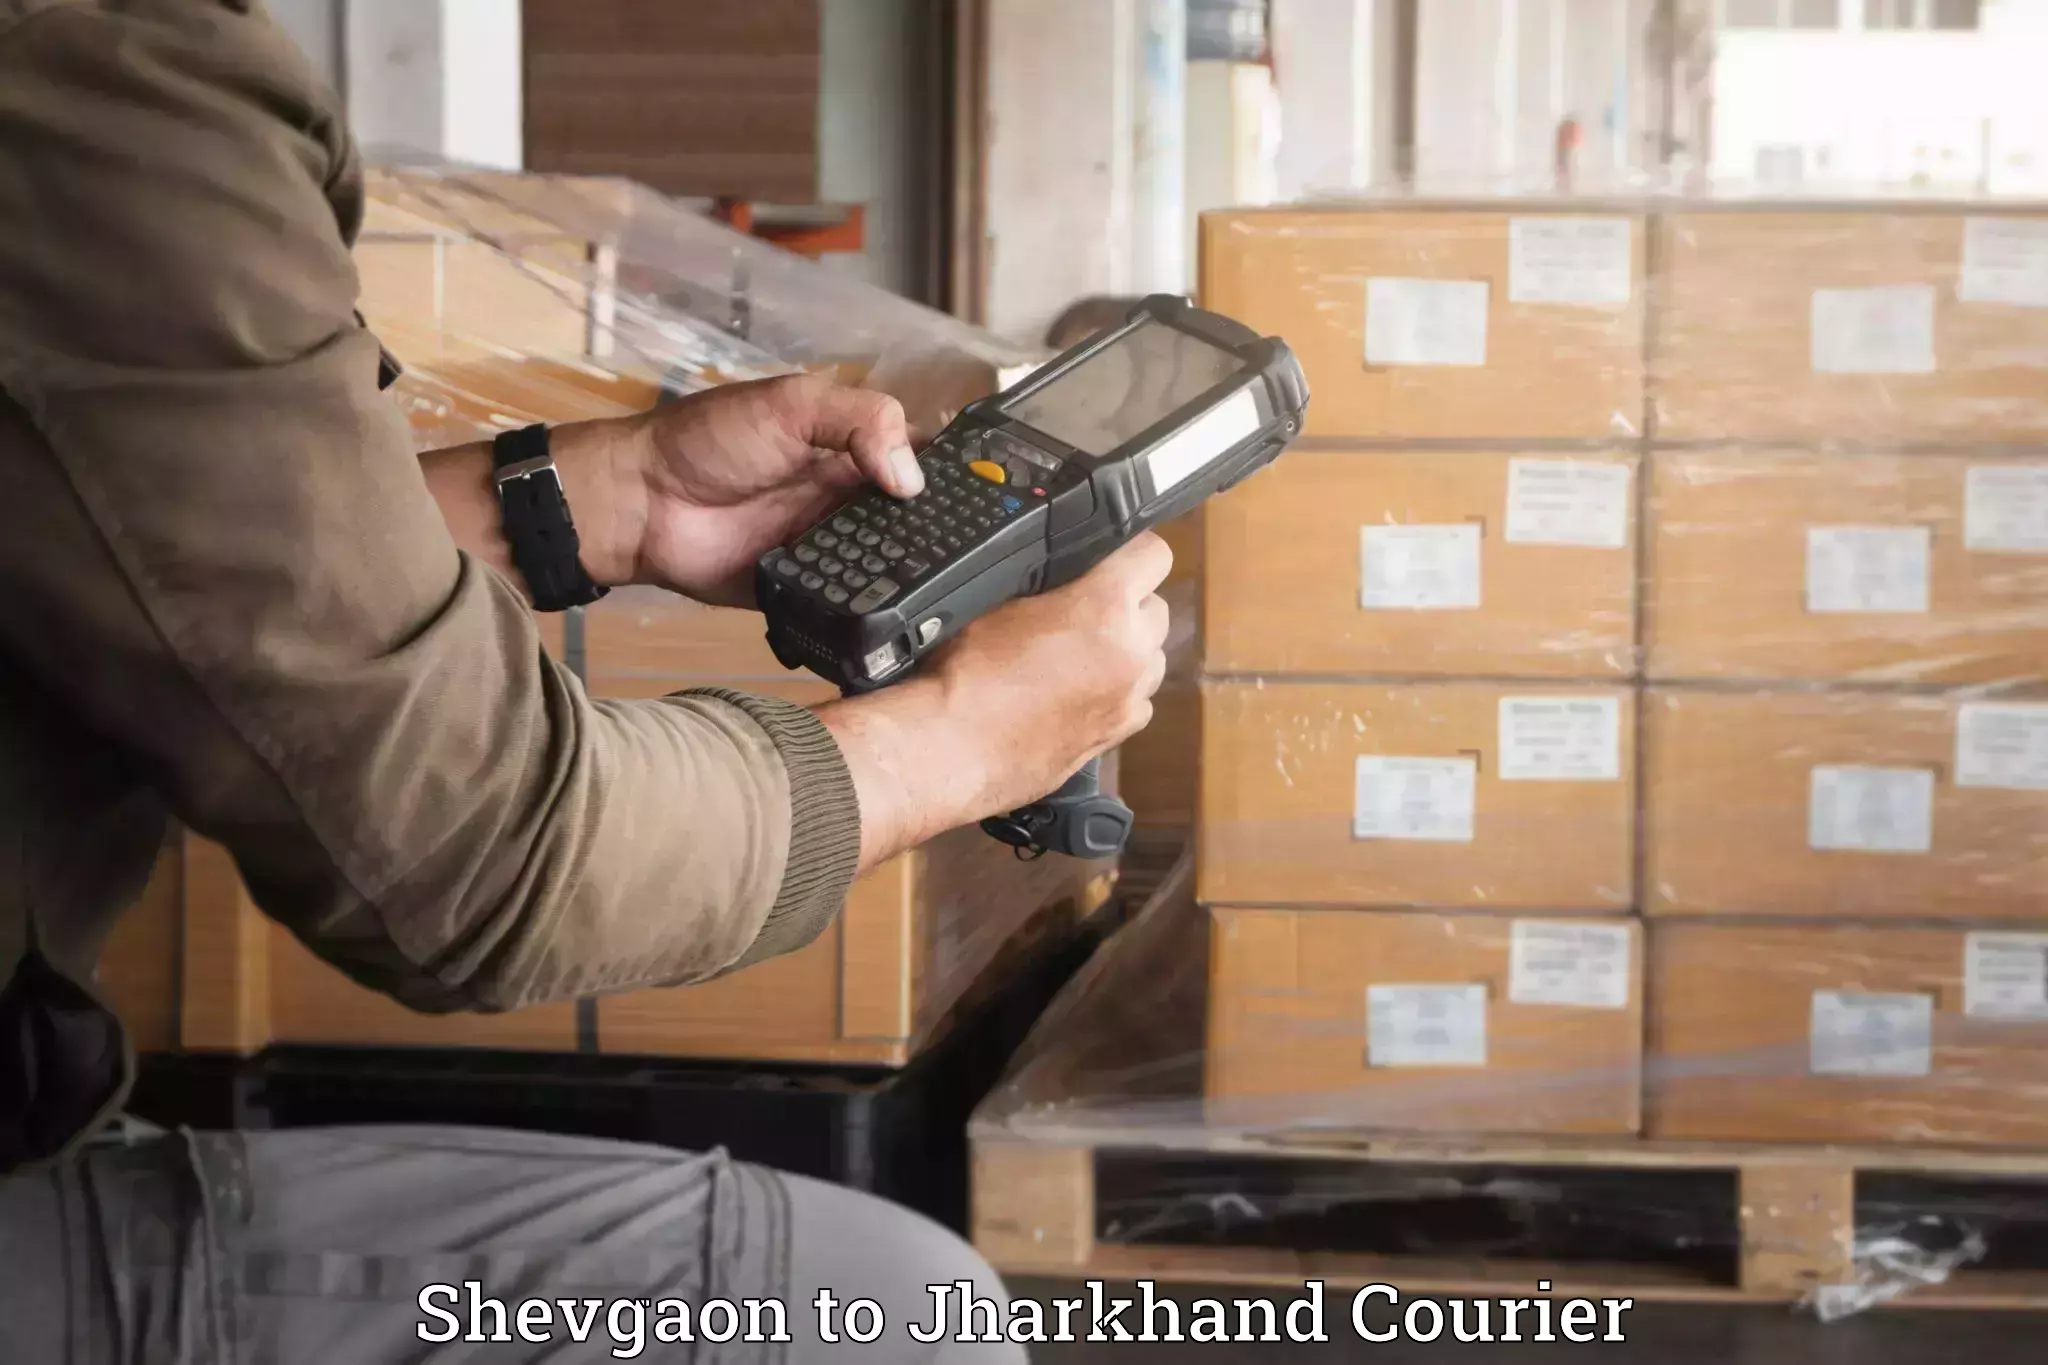 Luggage shipment specialists Shevgaon to Chatra